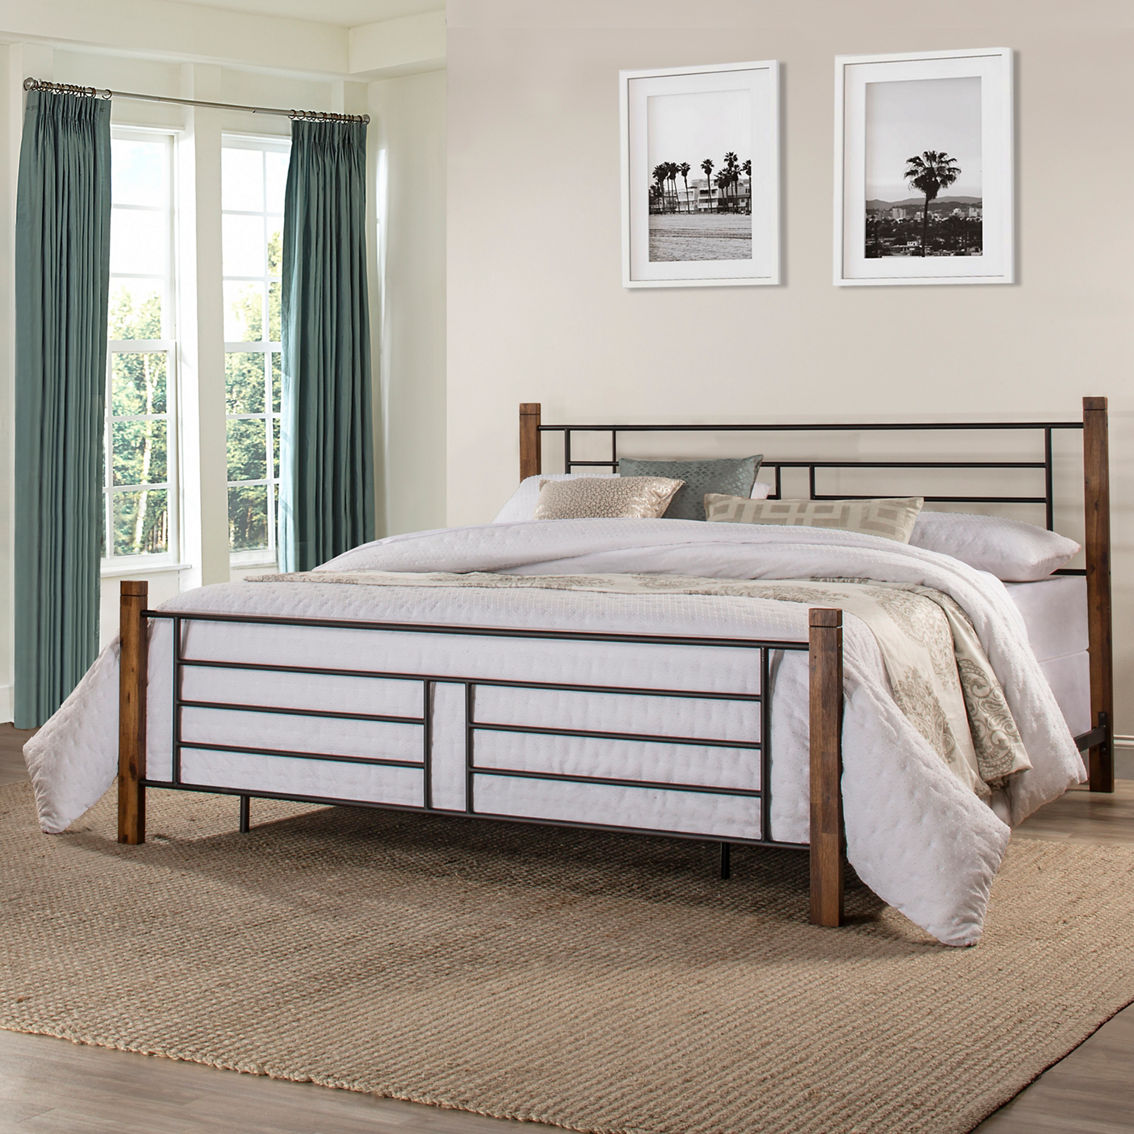 Hillsdale Furniture Raymond Metal Bed - Image 4 of 4